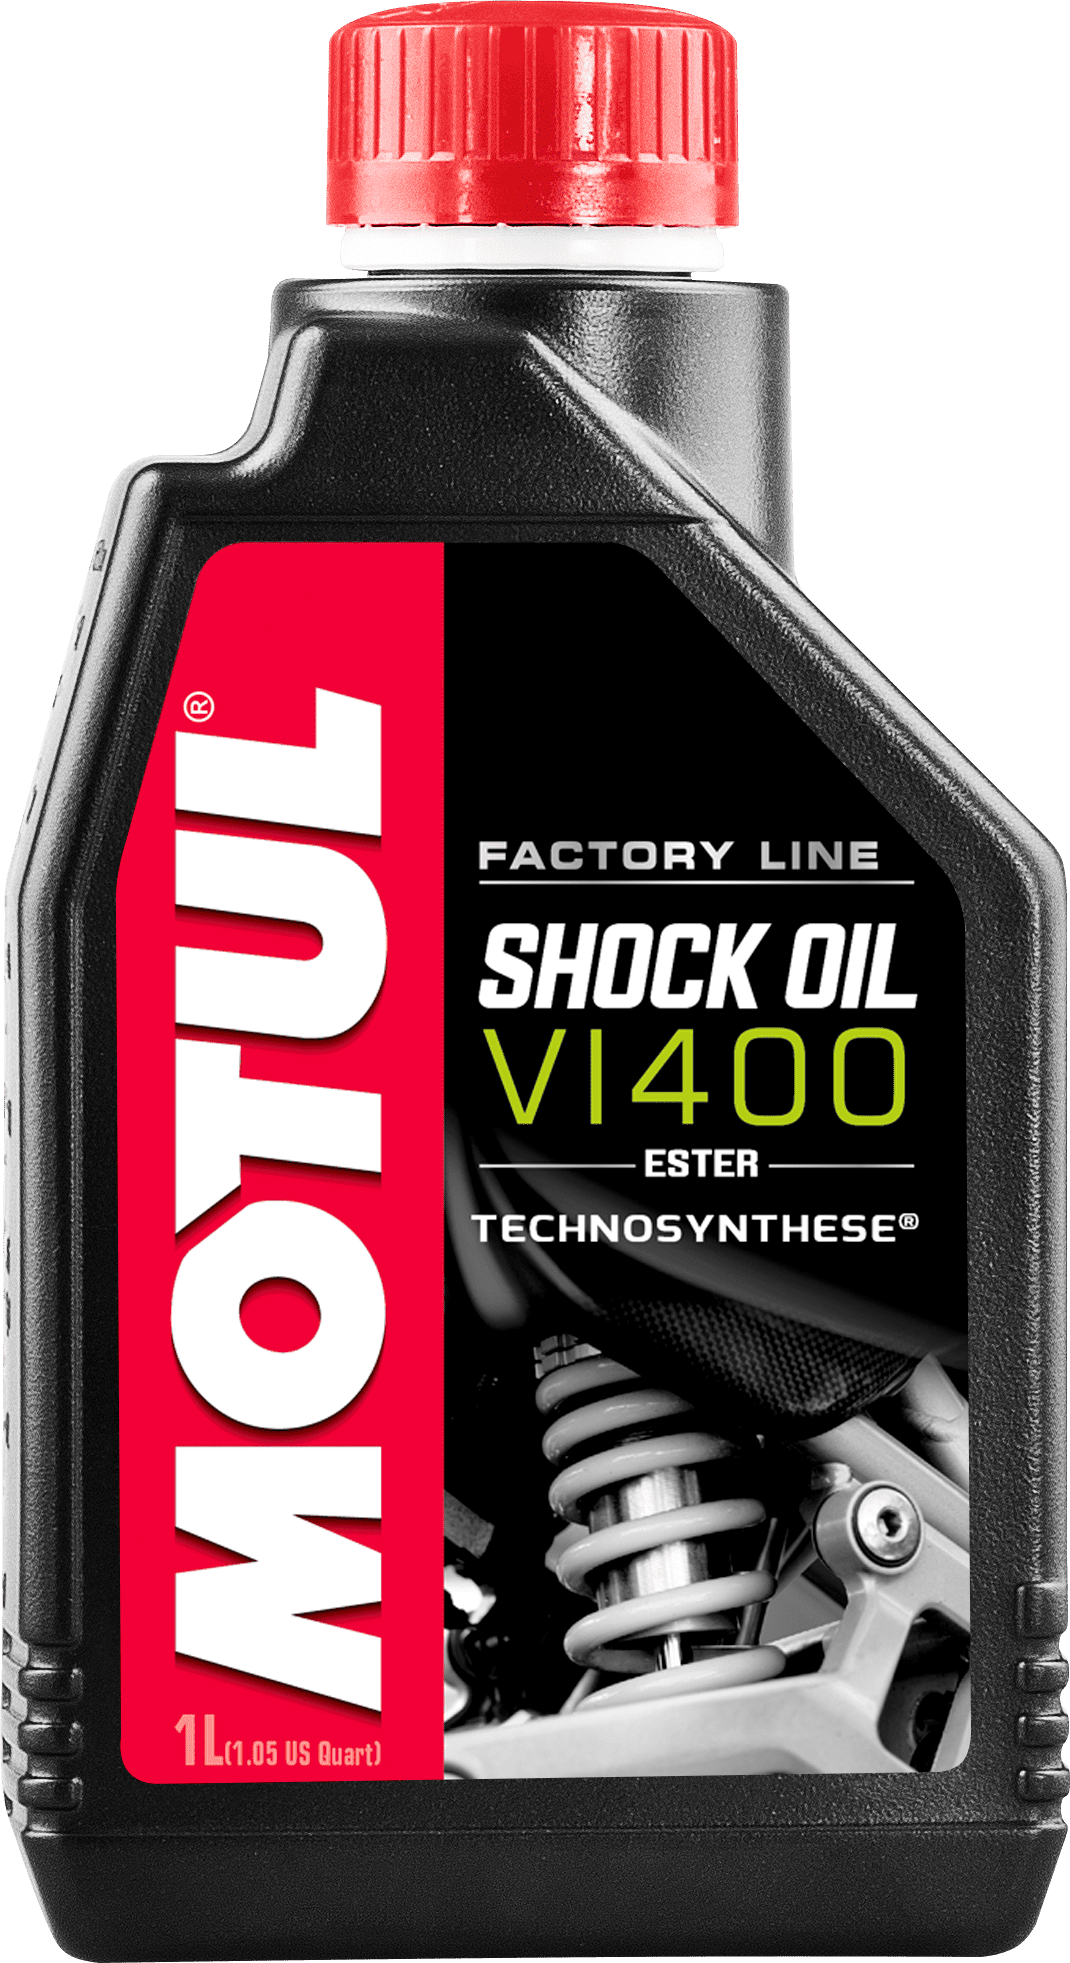 105923-1 Technosynthese® high performance hydraulic fluid for shock absorbers.